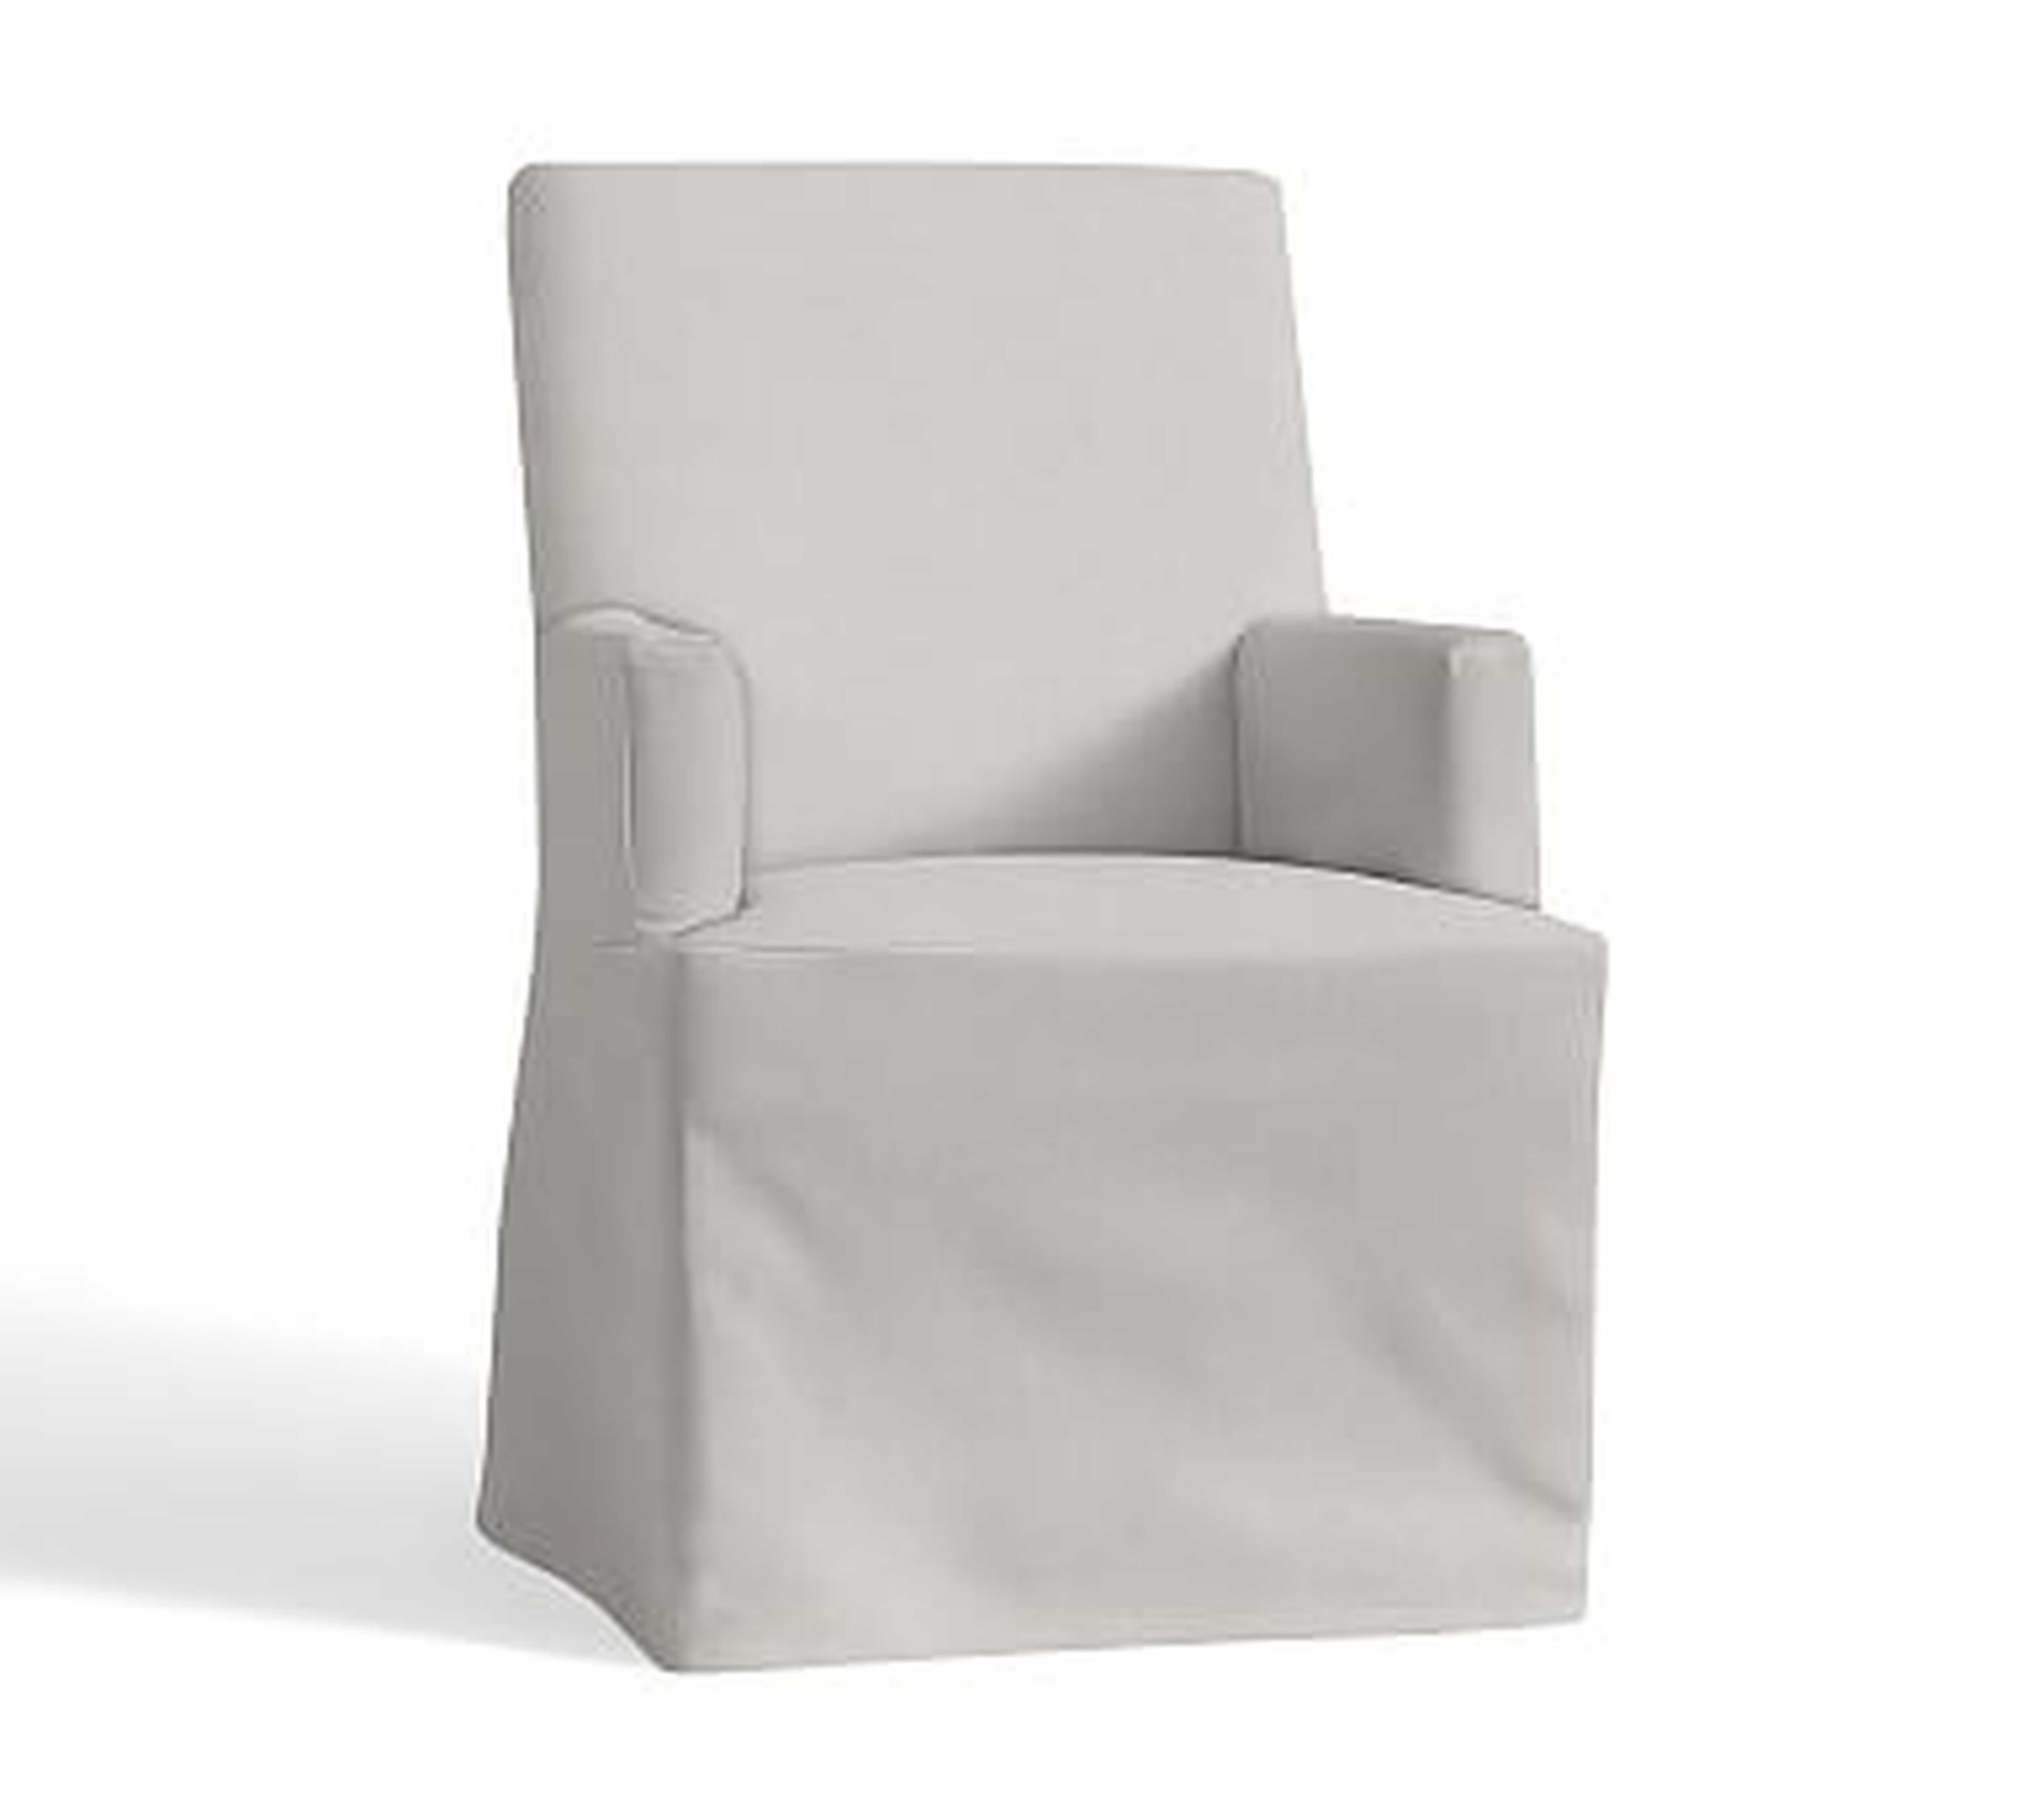 PB Comfort Square Arm Dining Long Slipcovered Armchair, Performance Heathered Tweed Ivory - Pottery Barn